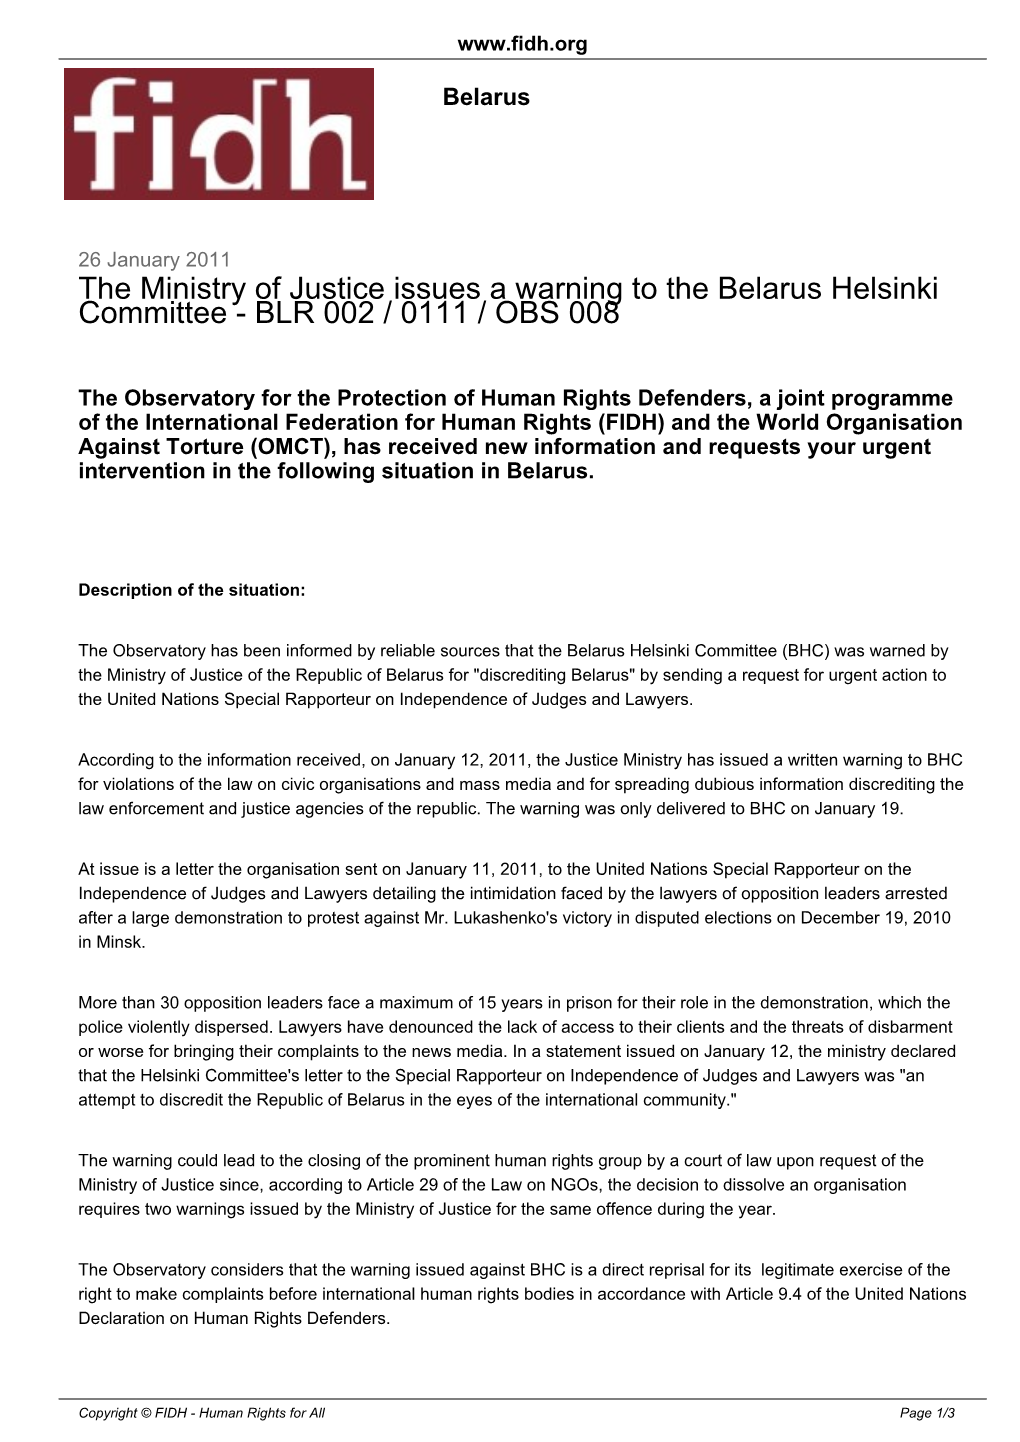 The Ministry of Justice Issues a Warning to the Belarus Helsinki Committee - BLR 002 / 0111 / OBS 008